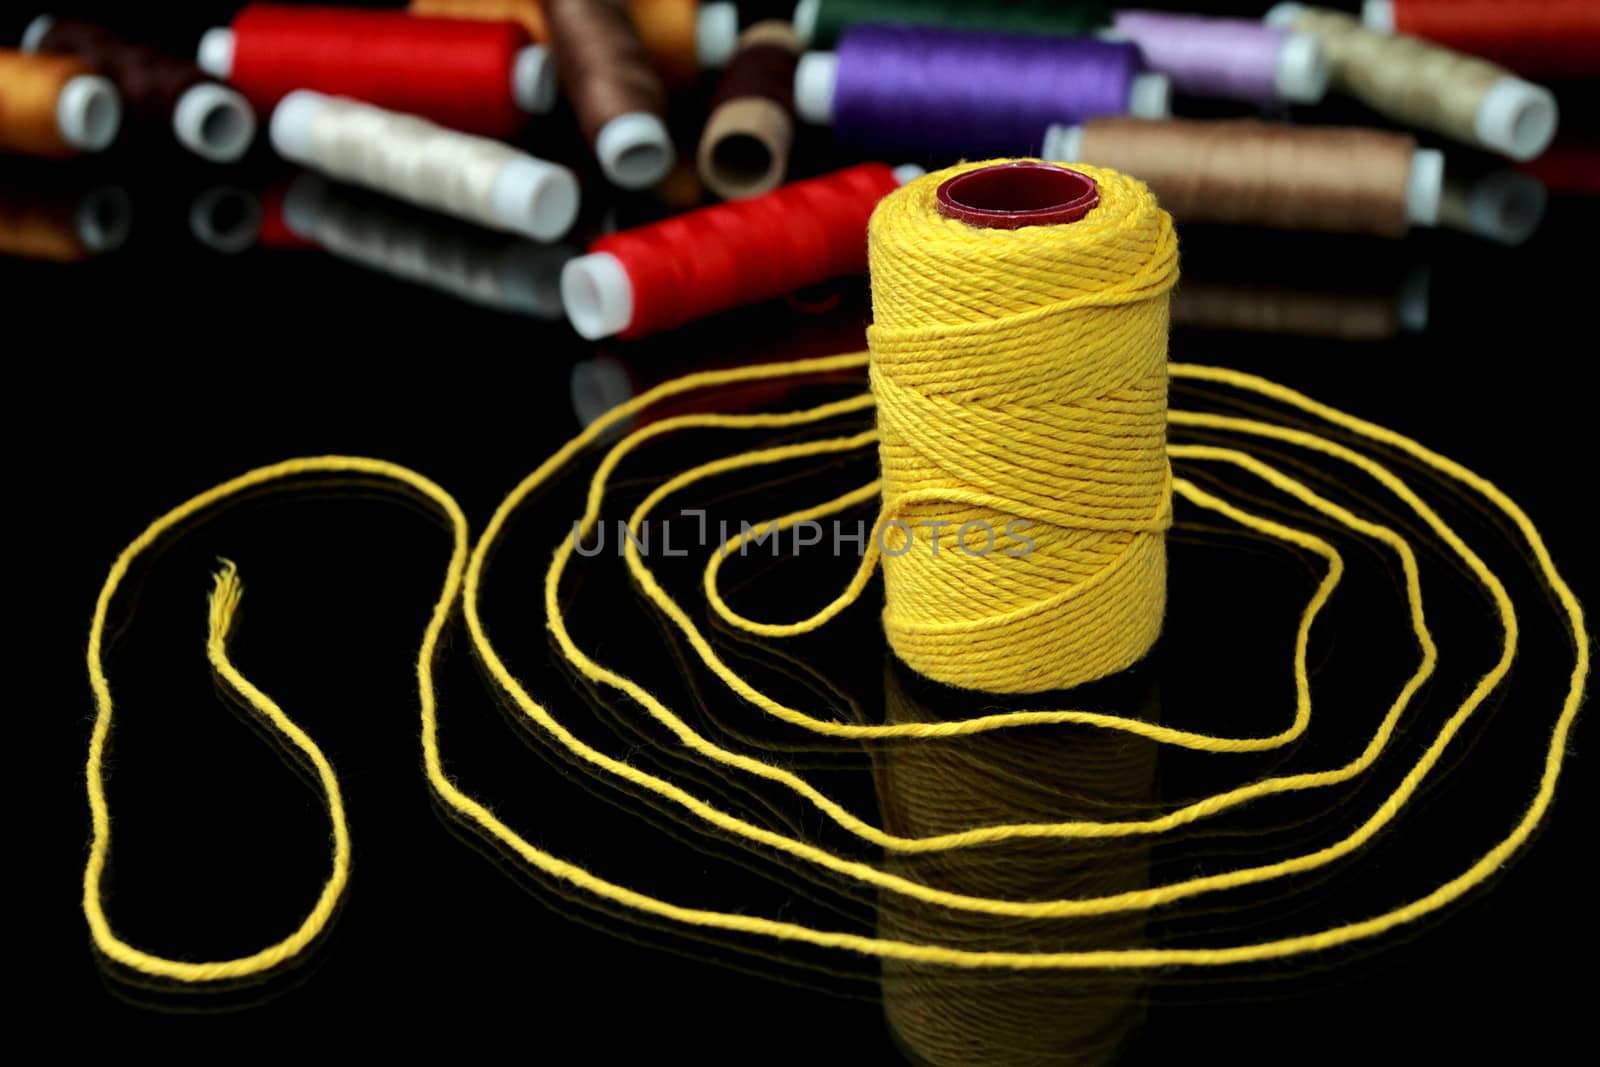 Focus on one reel of thread on a black background